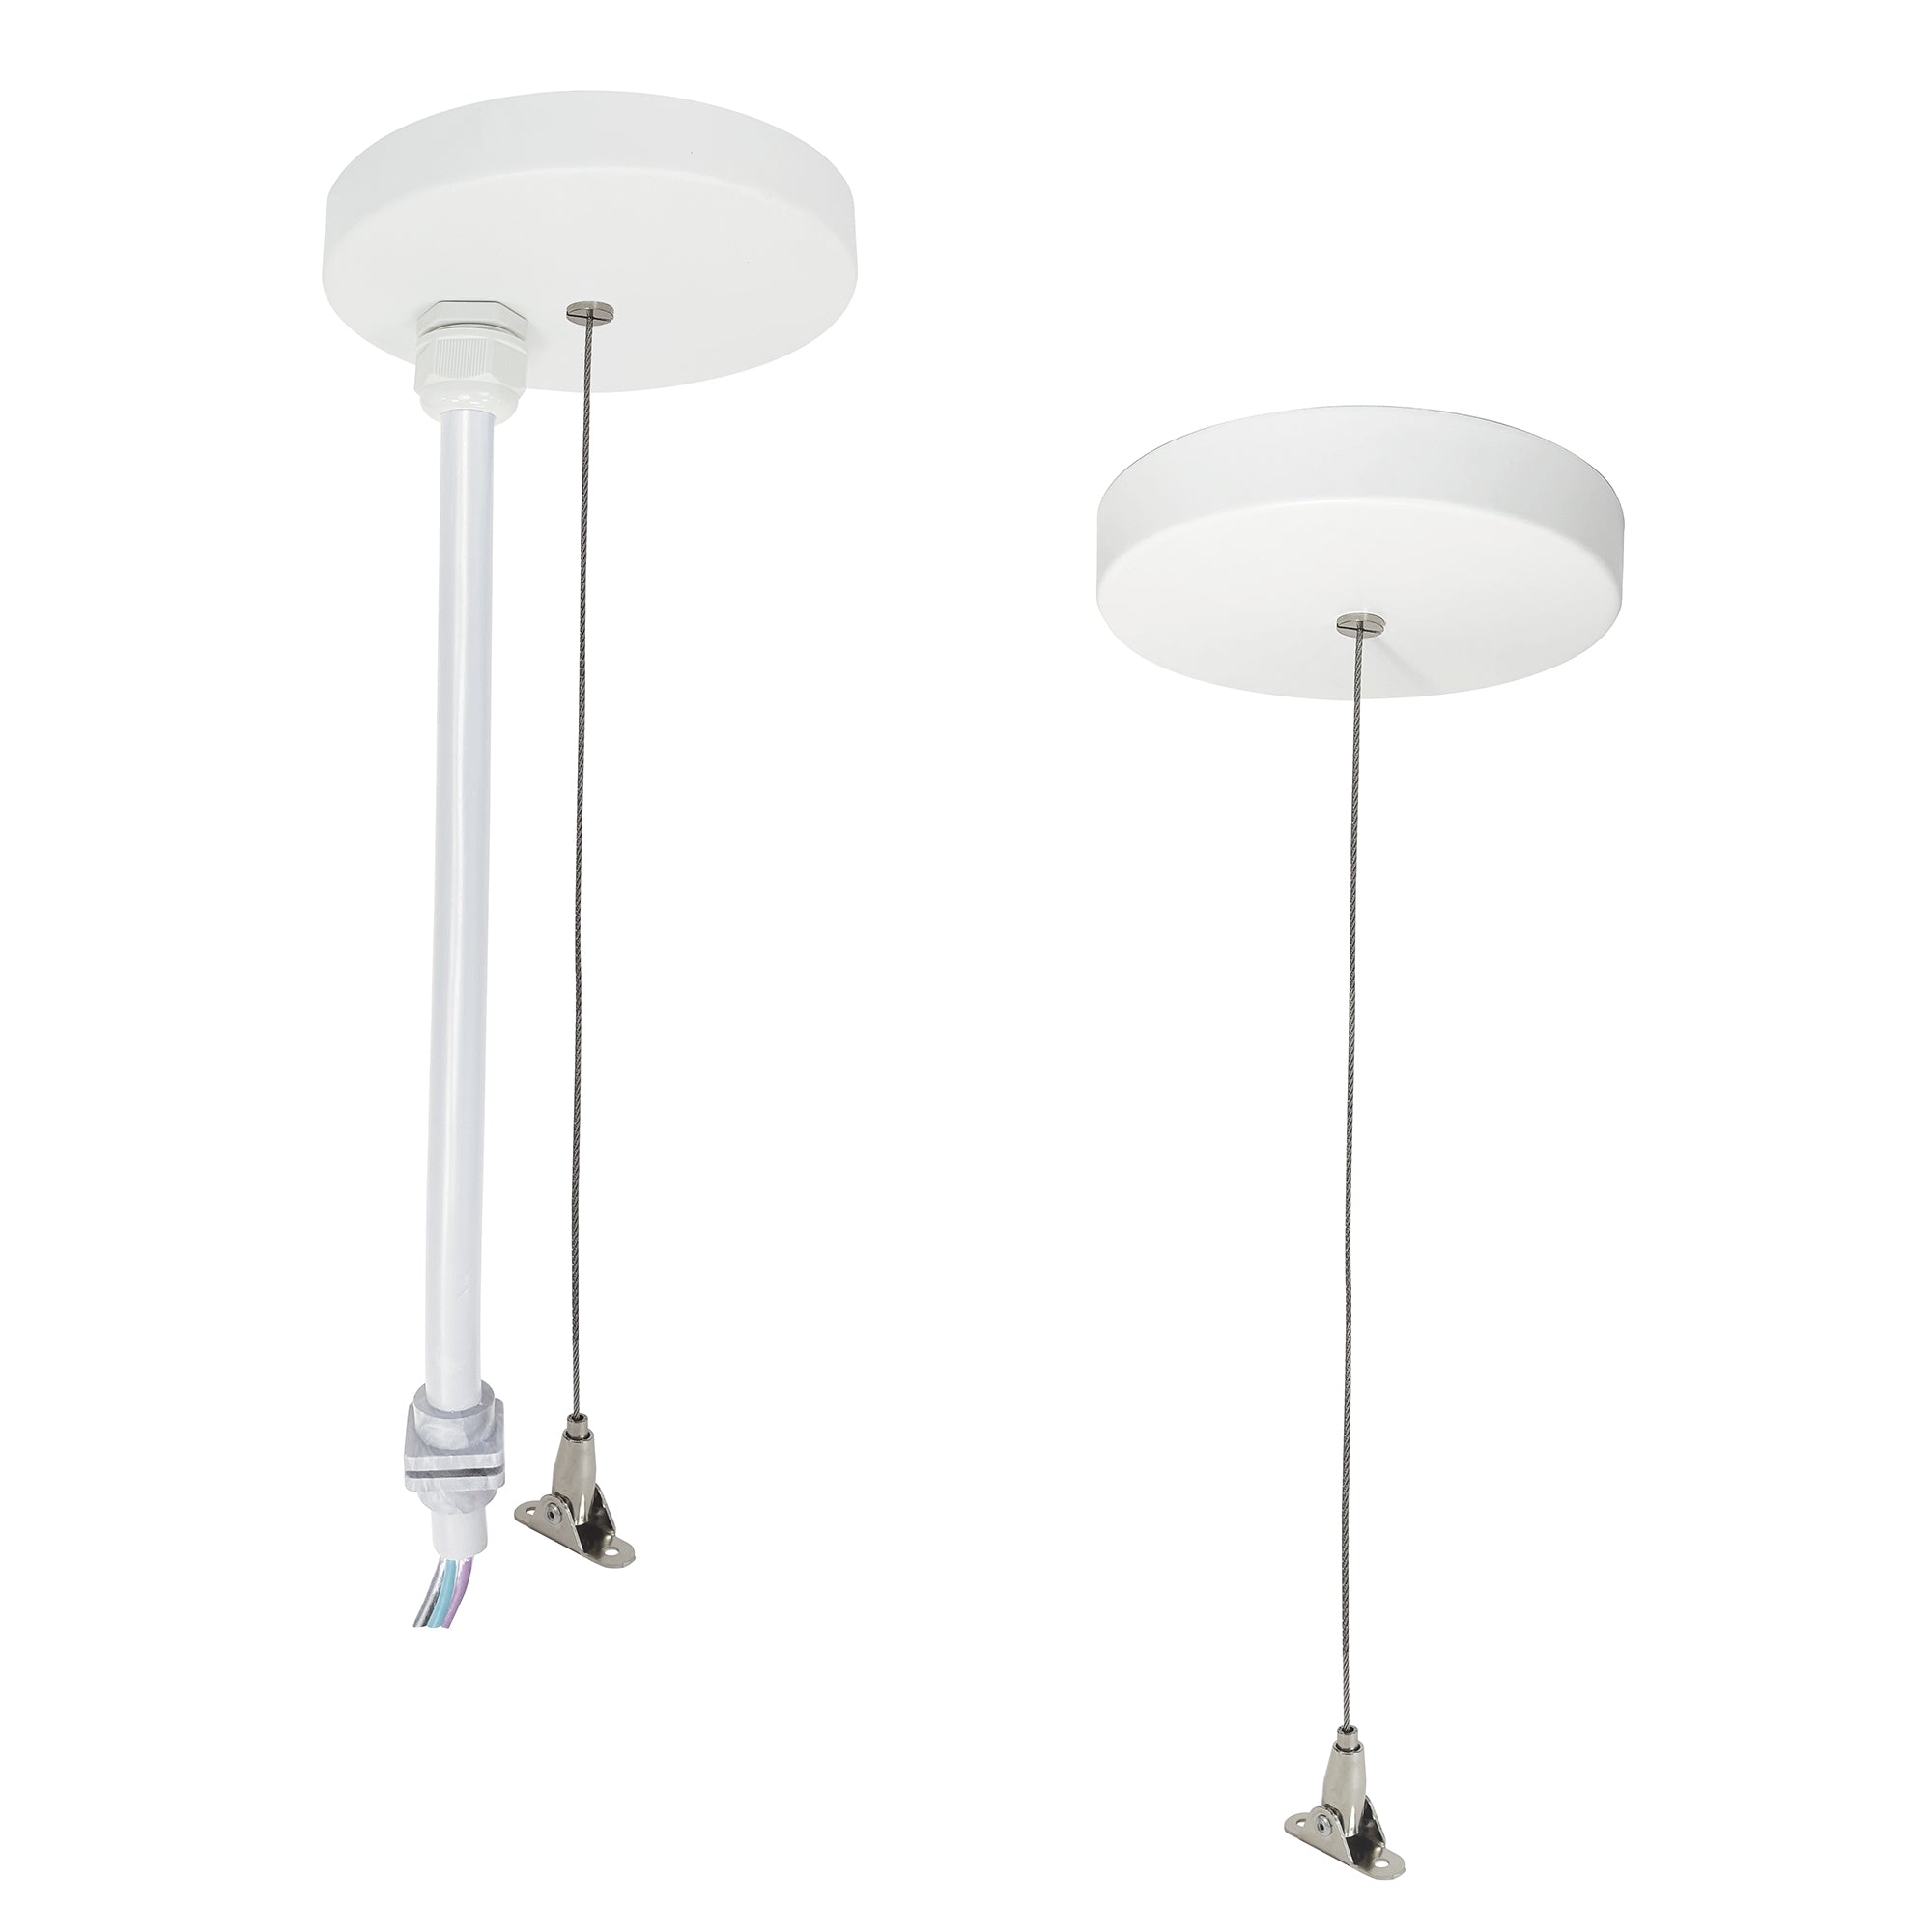 Nora Lighting NLUD-PCCW - Linear - 8' Pendant Power & Aircraft Mounting Kit for NLUD Series, White Finish